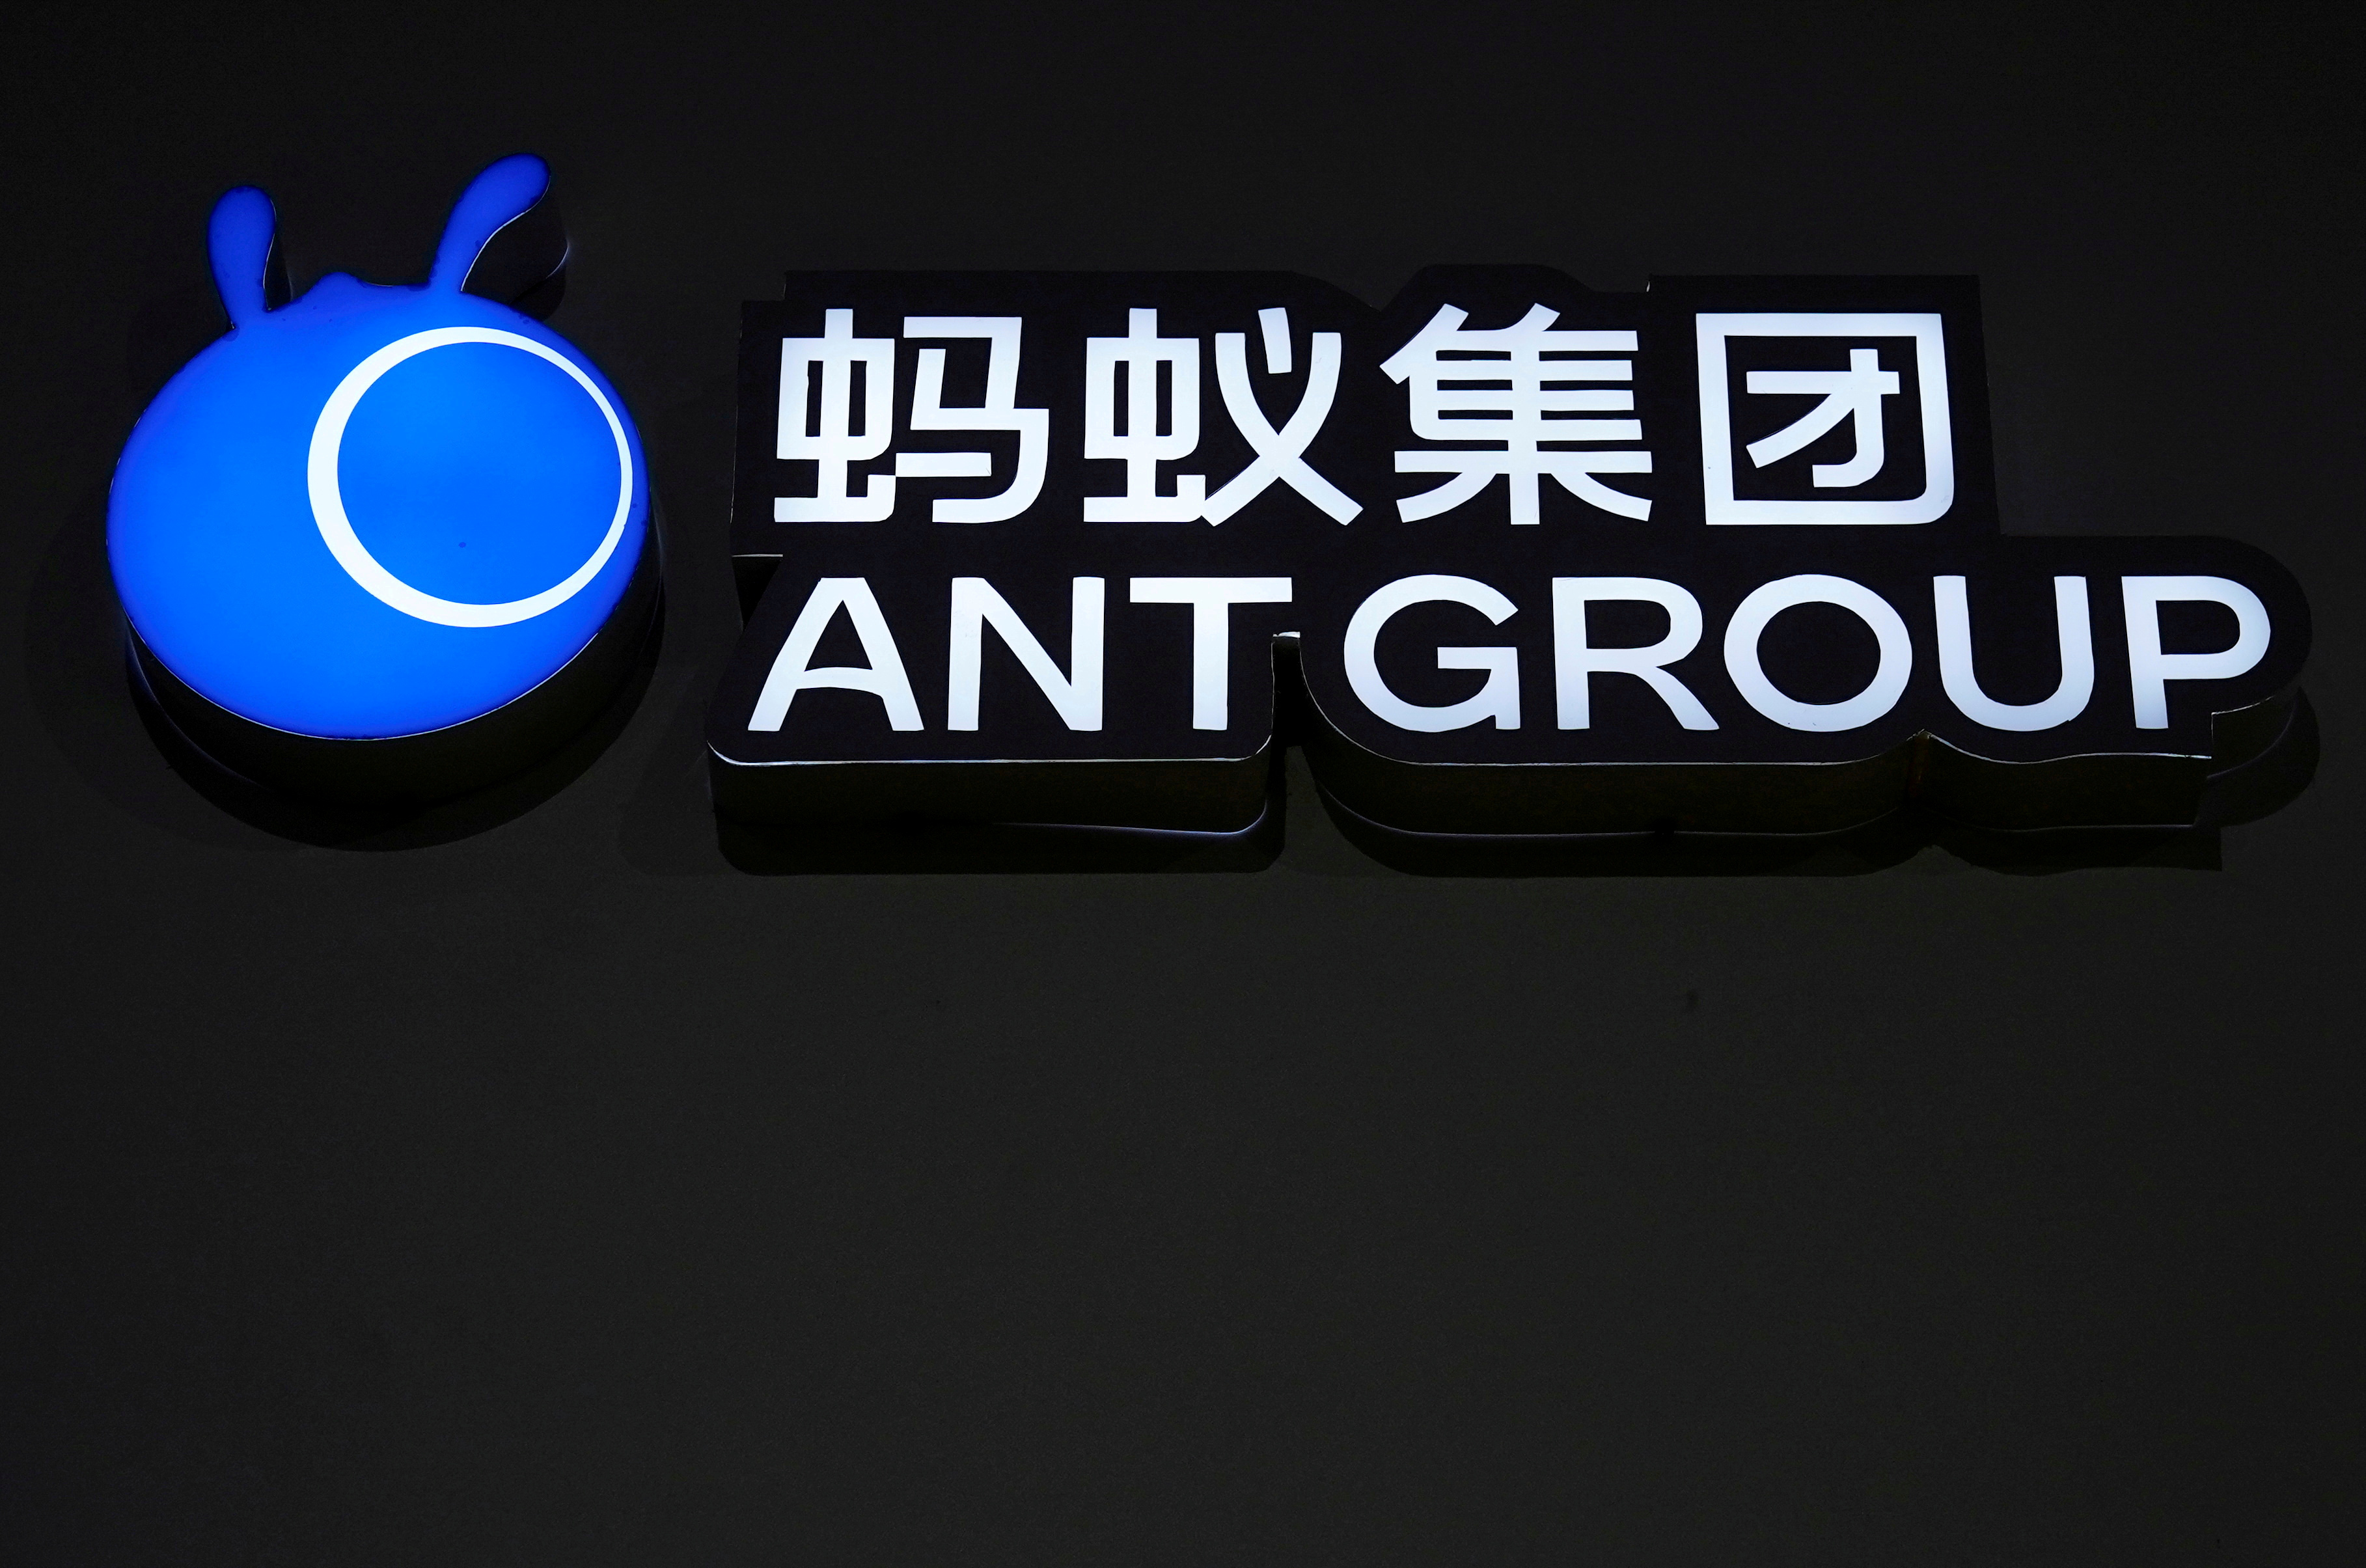 A sign of Ant Group is seen during the World Internet Conference (WIC) in Wuzhen